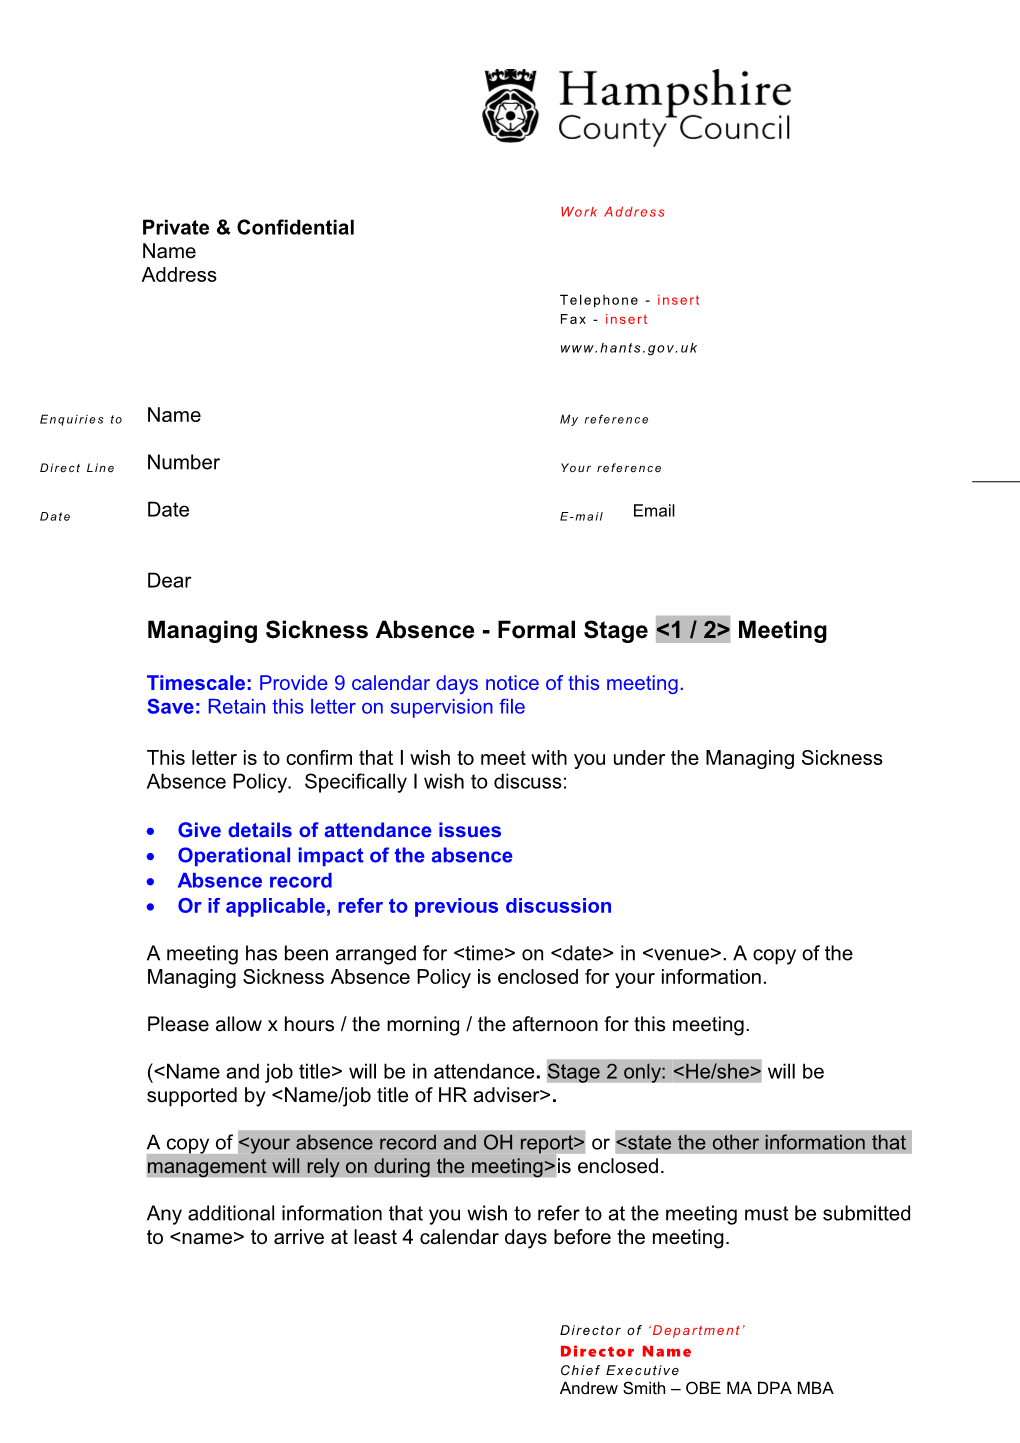 Managing Sickness Absence - Formal Stage &lt;1 / 2 Meeting